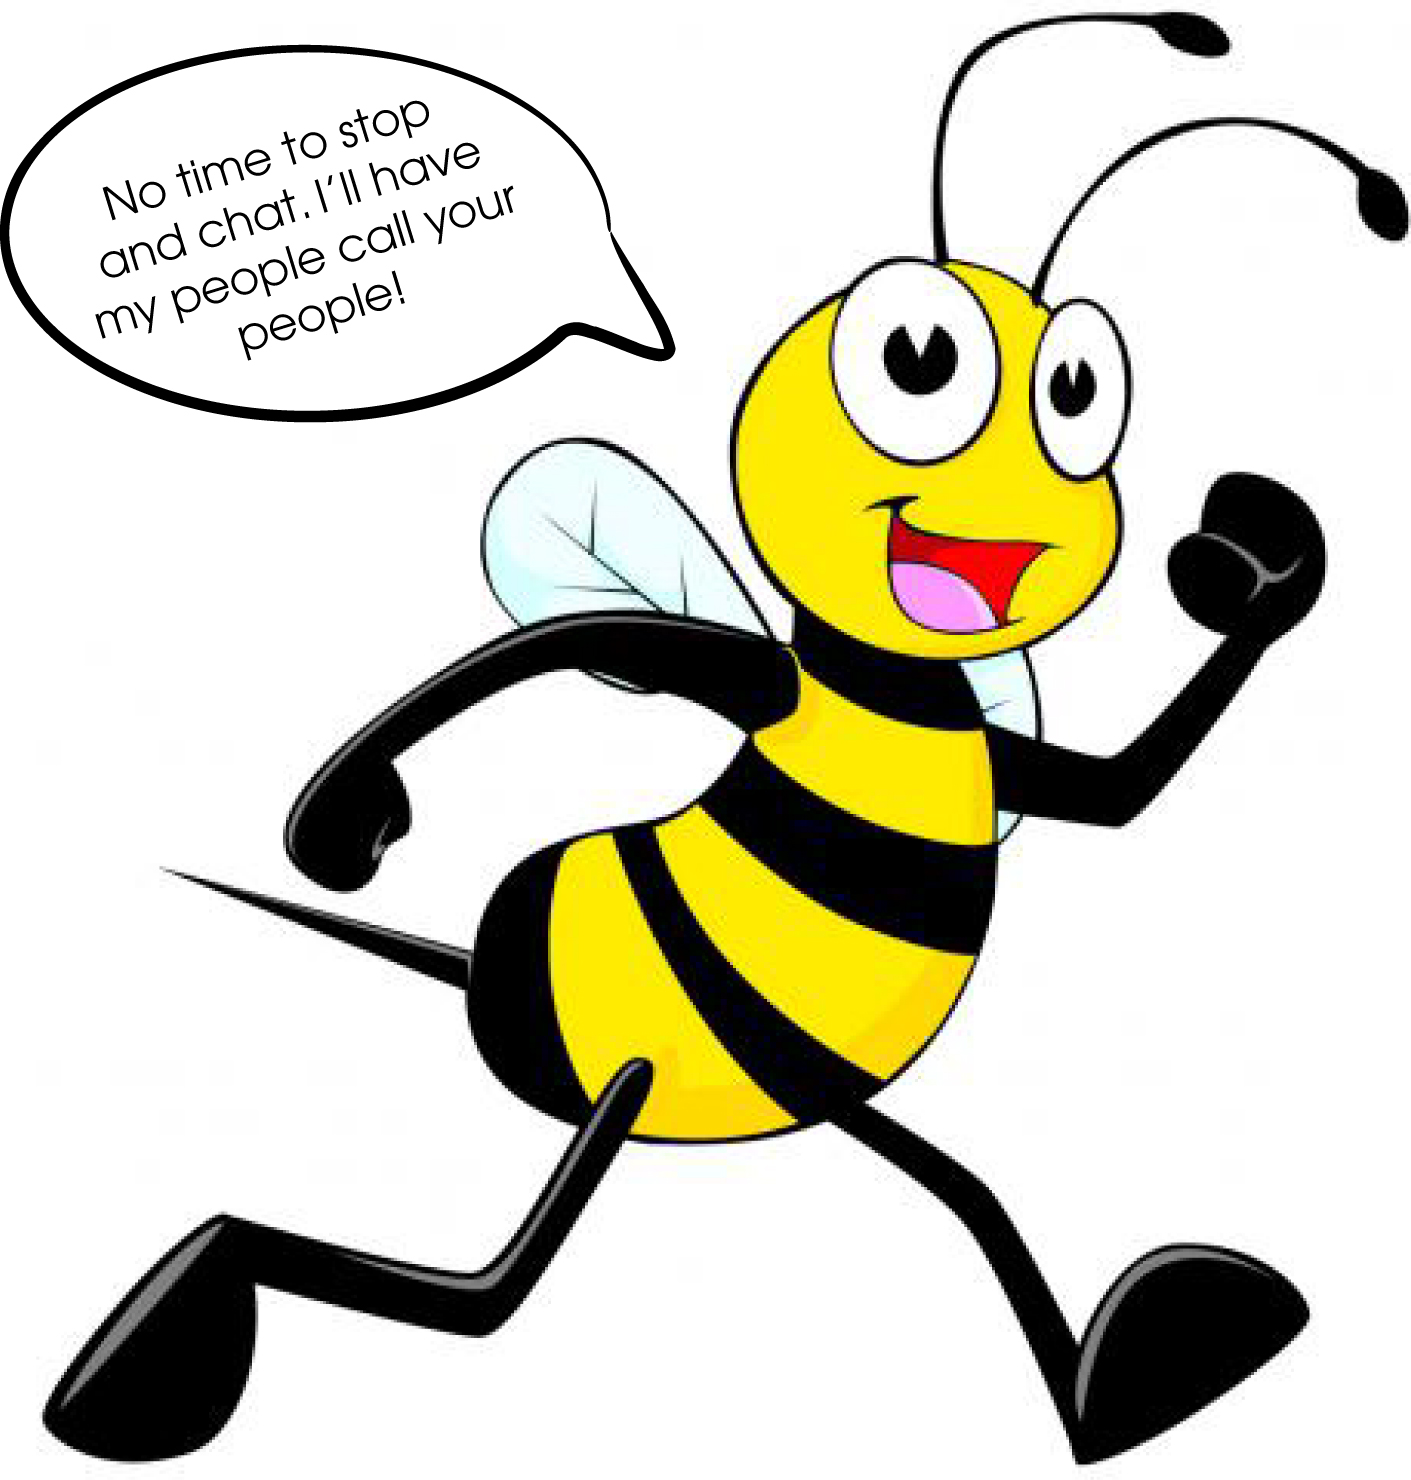 Spelling bee clipart free